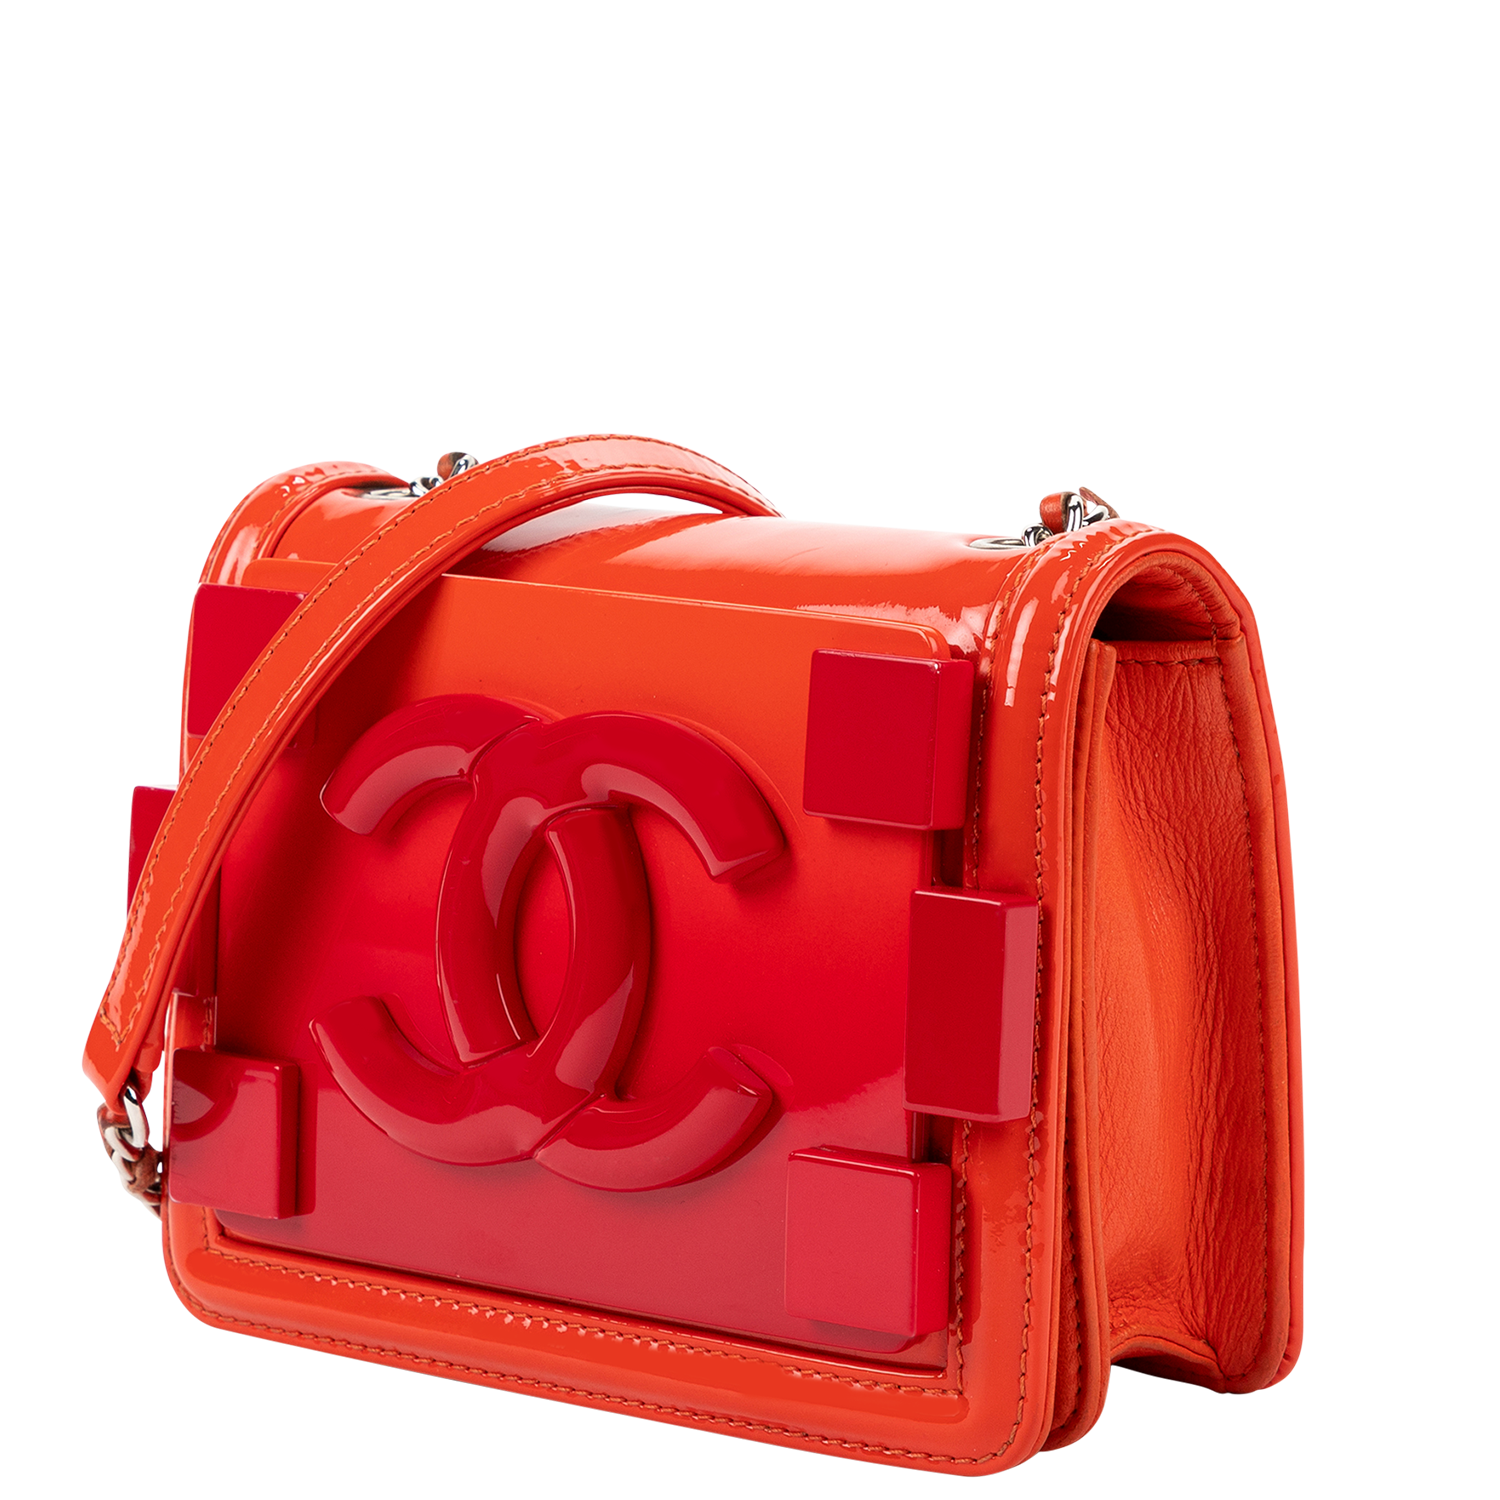 Chanel Limited Edition 2014 Runway Red Ombre CC Flap Bag